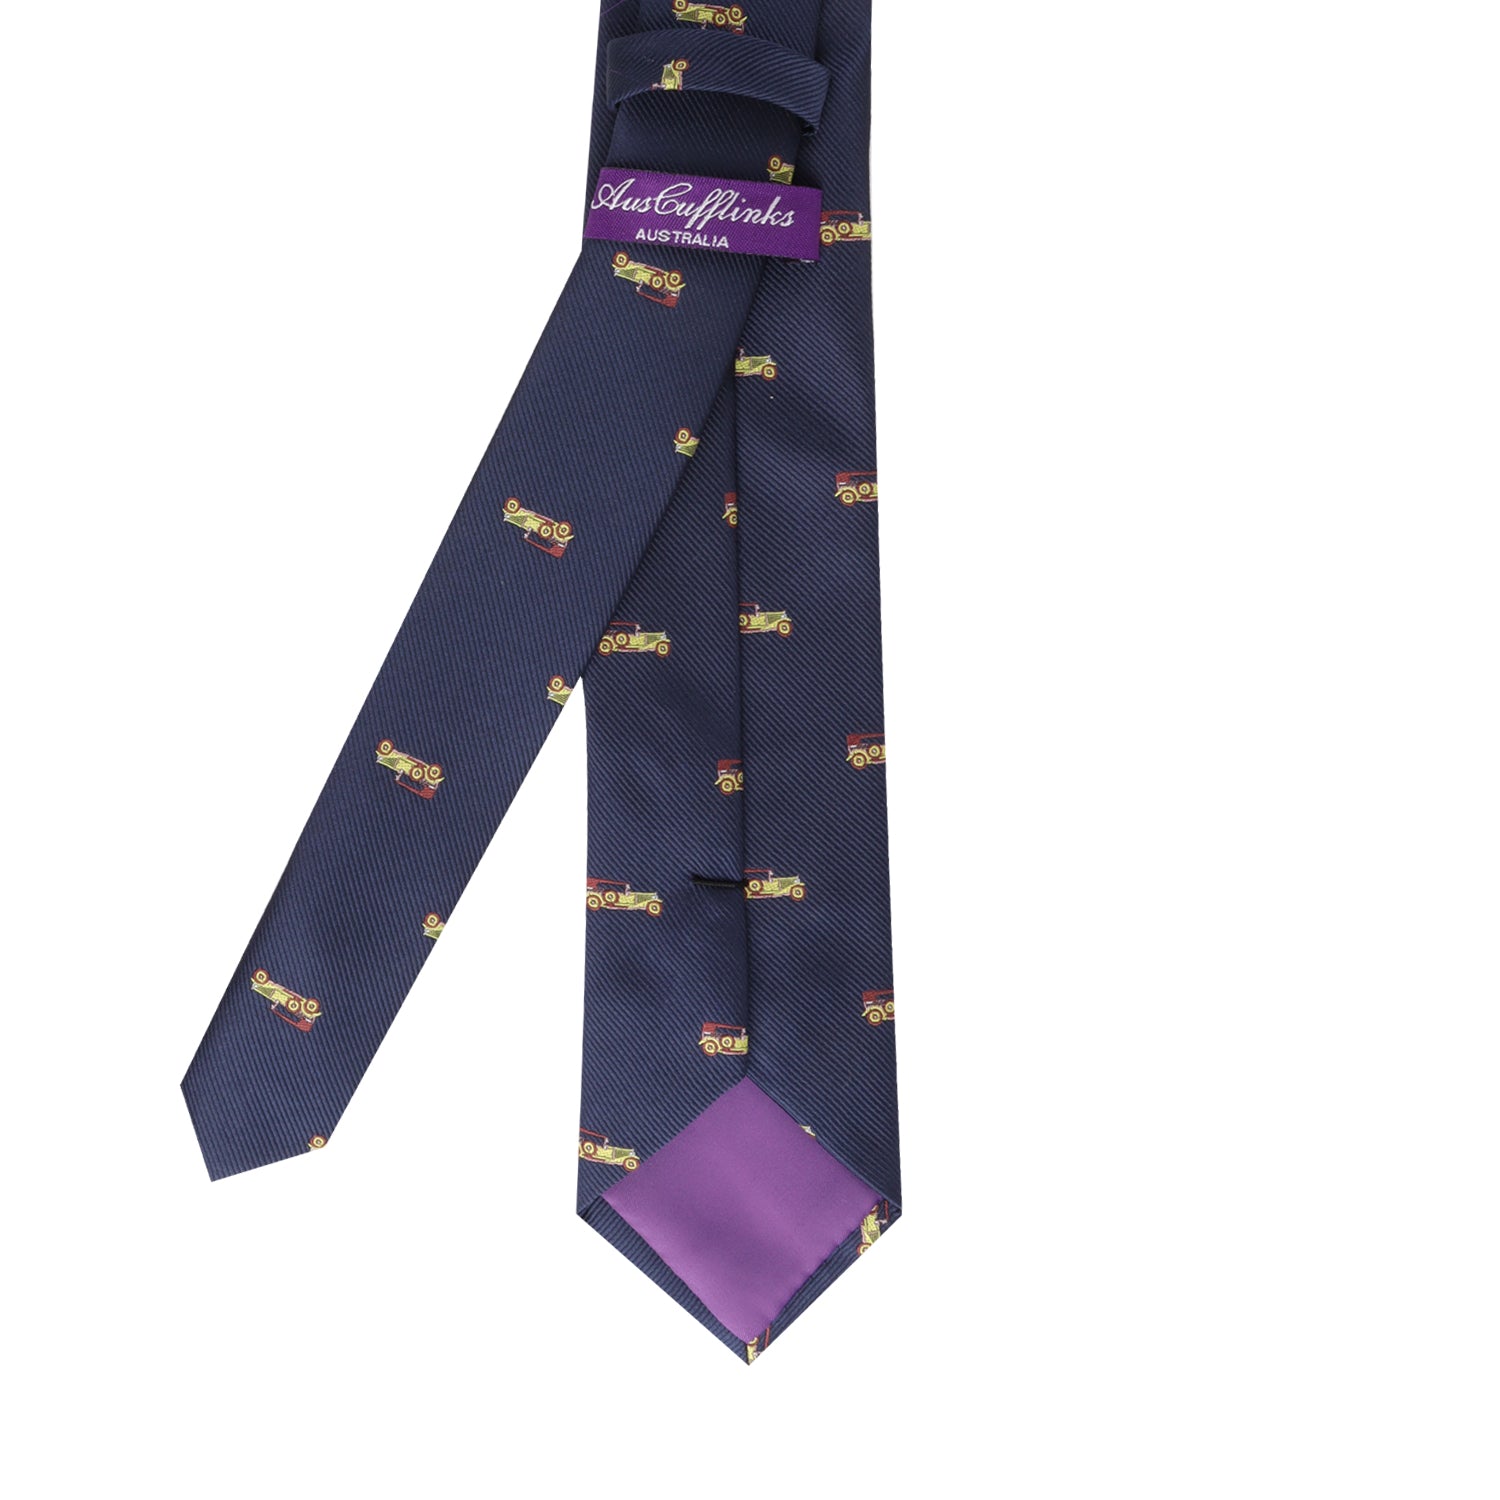 A Classic Car Skinny Tie with a purple and yellow vintage class design on it.